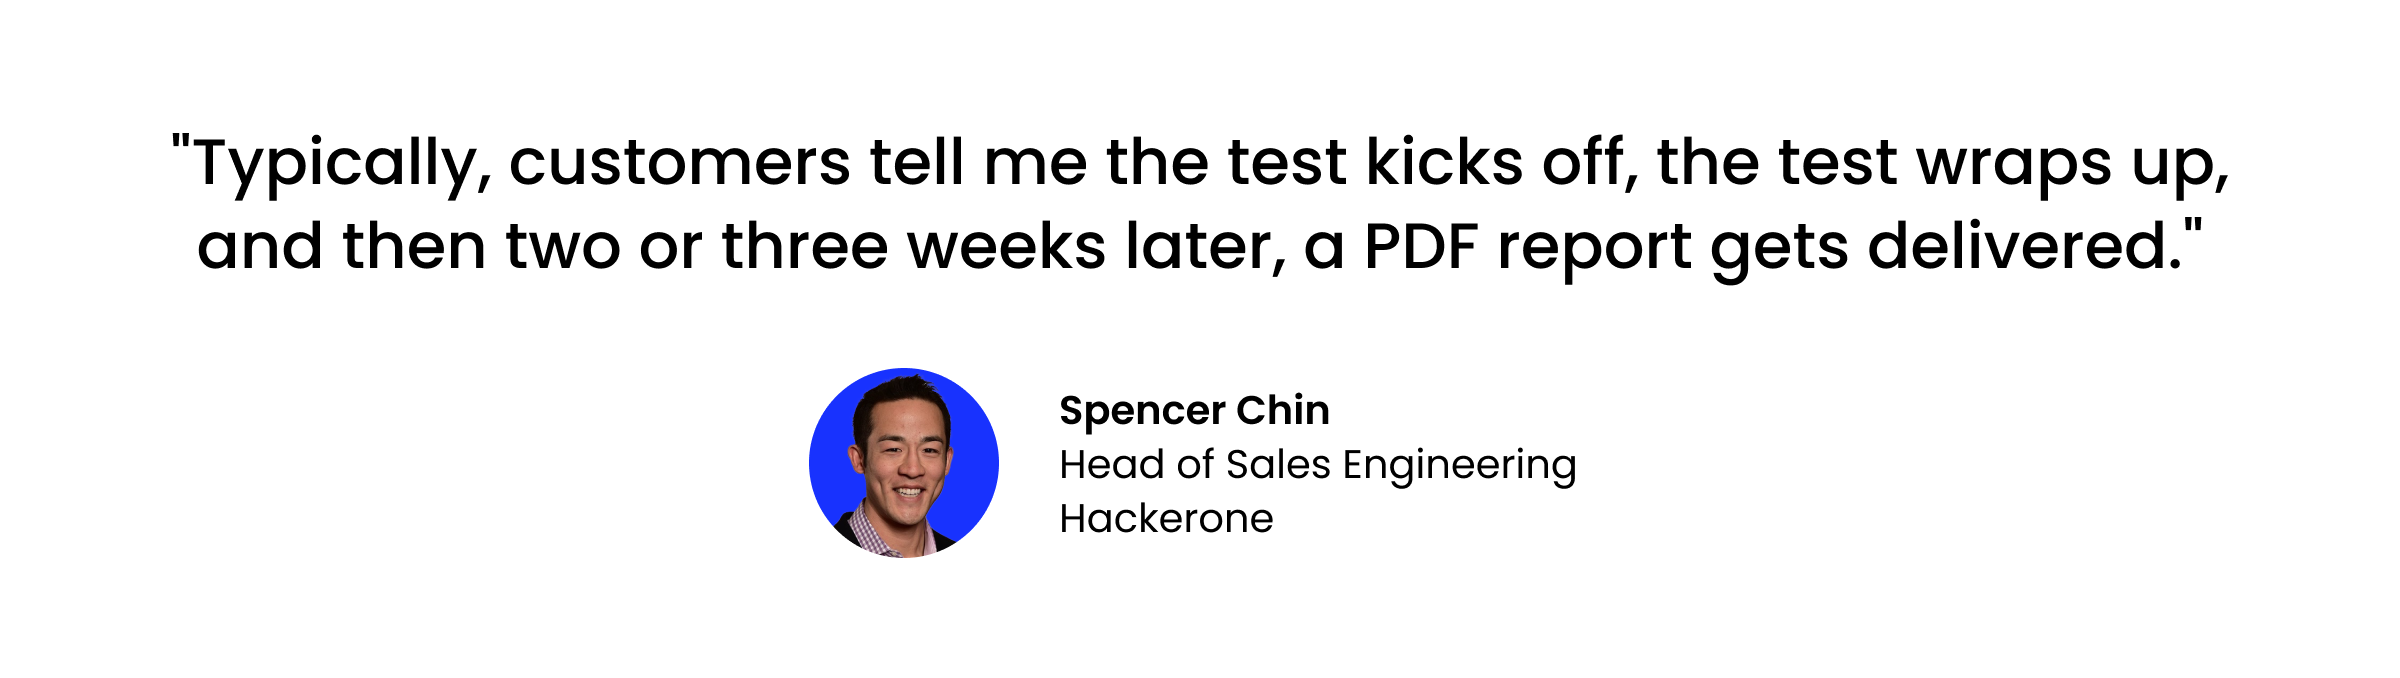 Quote from HackerOne's Spencer Chin